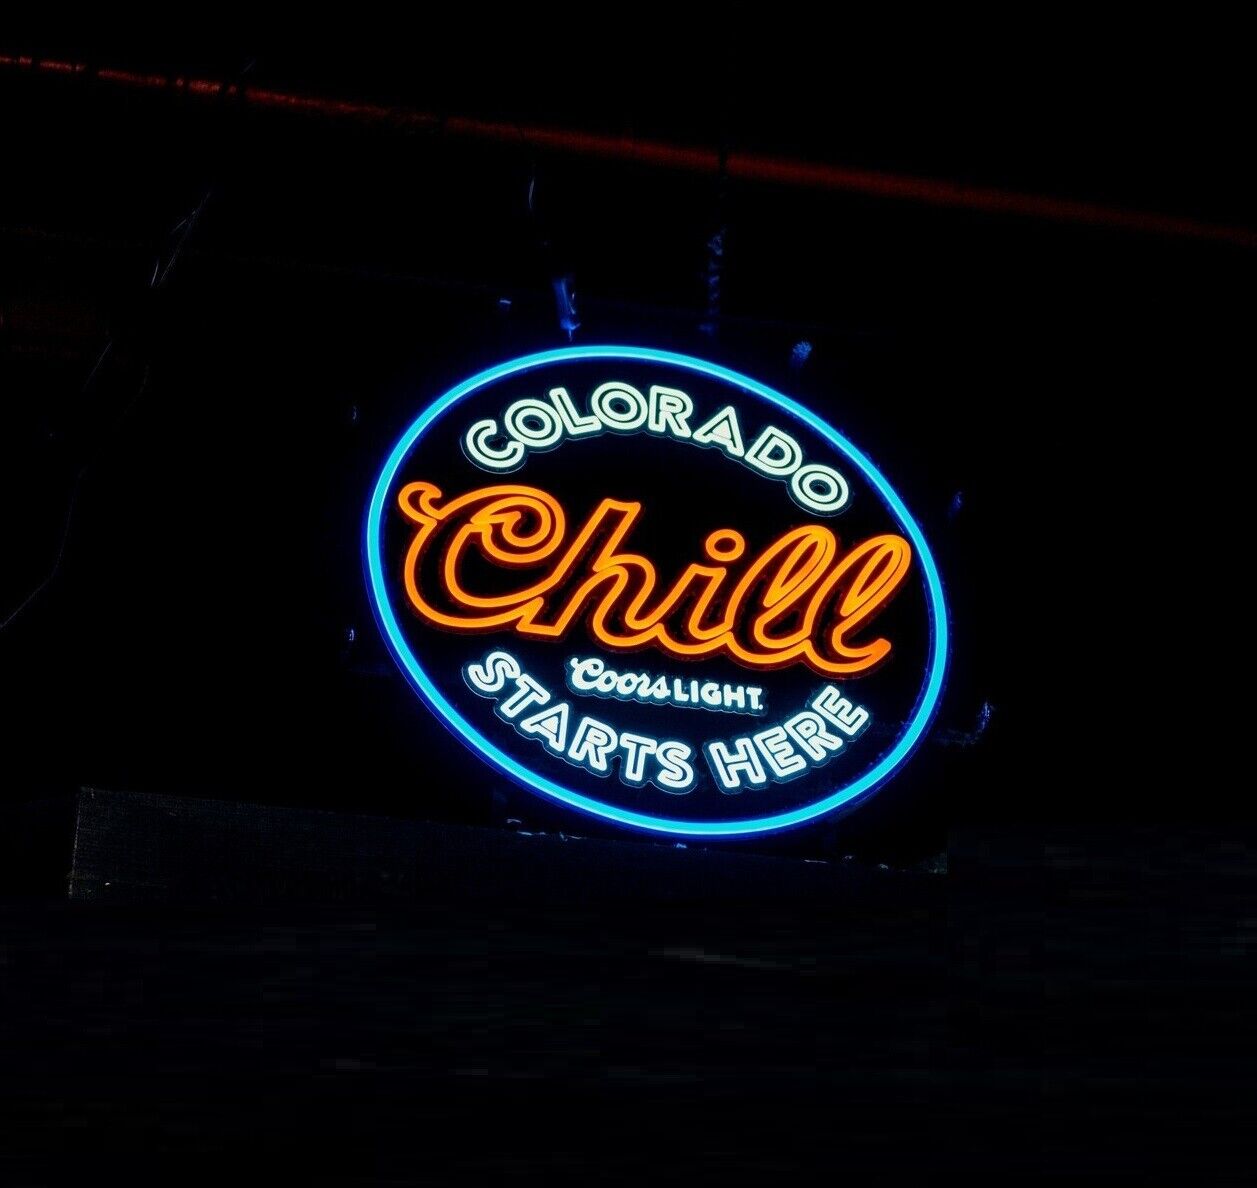 Beer Lager Chill Starts Here Colorado Vivid LED Neon Sign Light Lamp With Dimmer